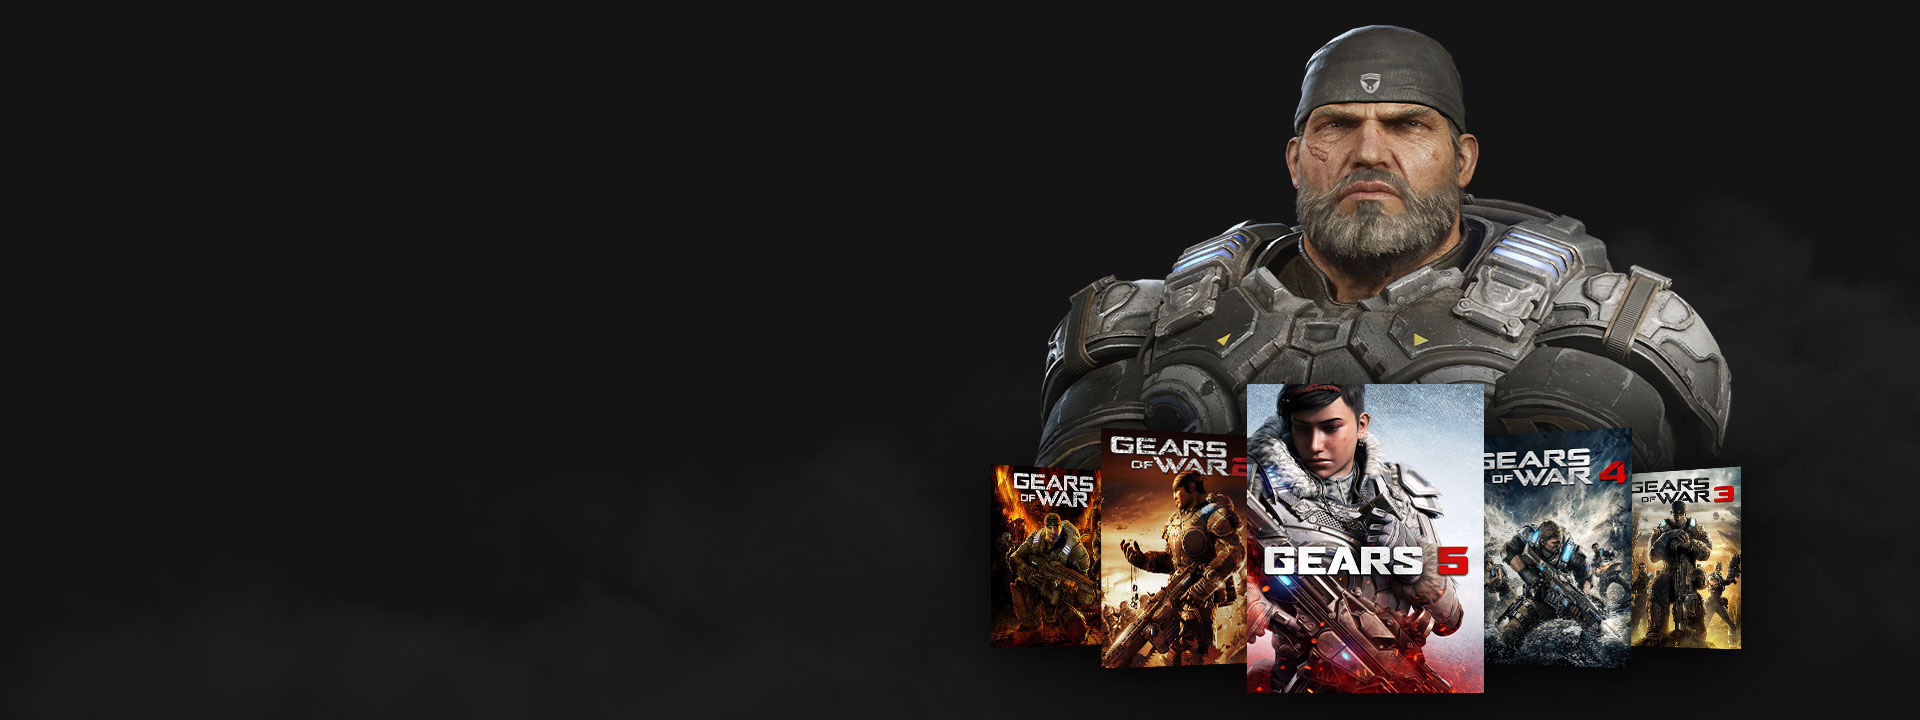 Xbox Game Pass Logo, Marcus poses with the Gears of War games.